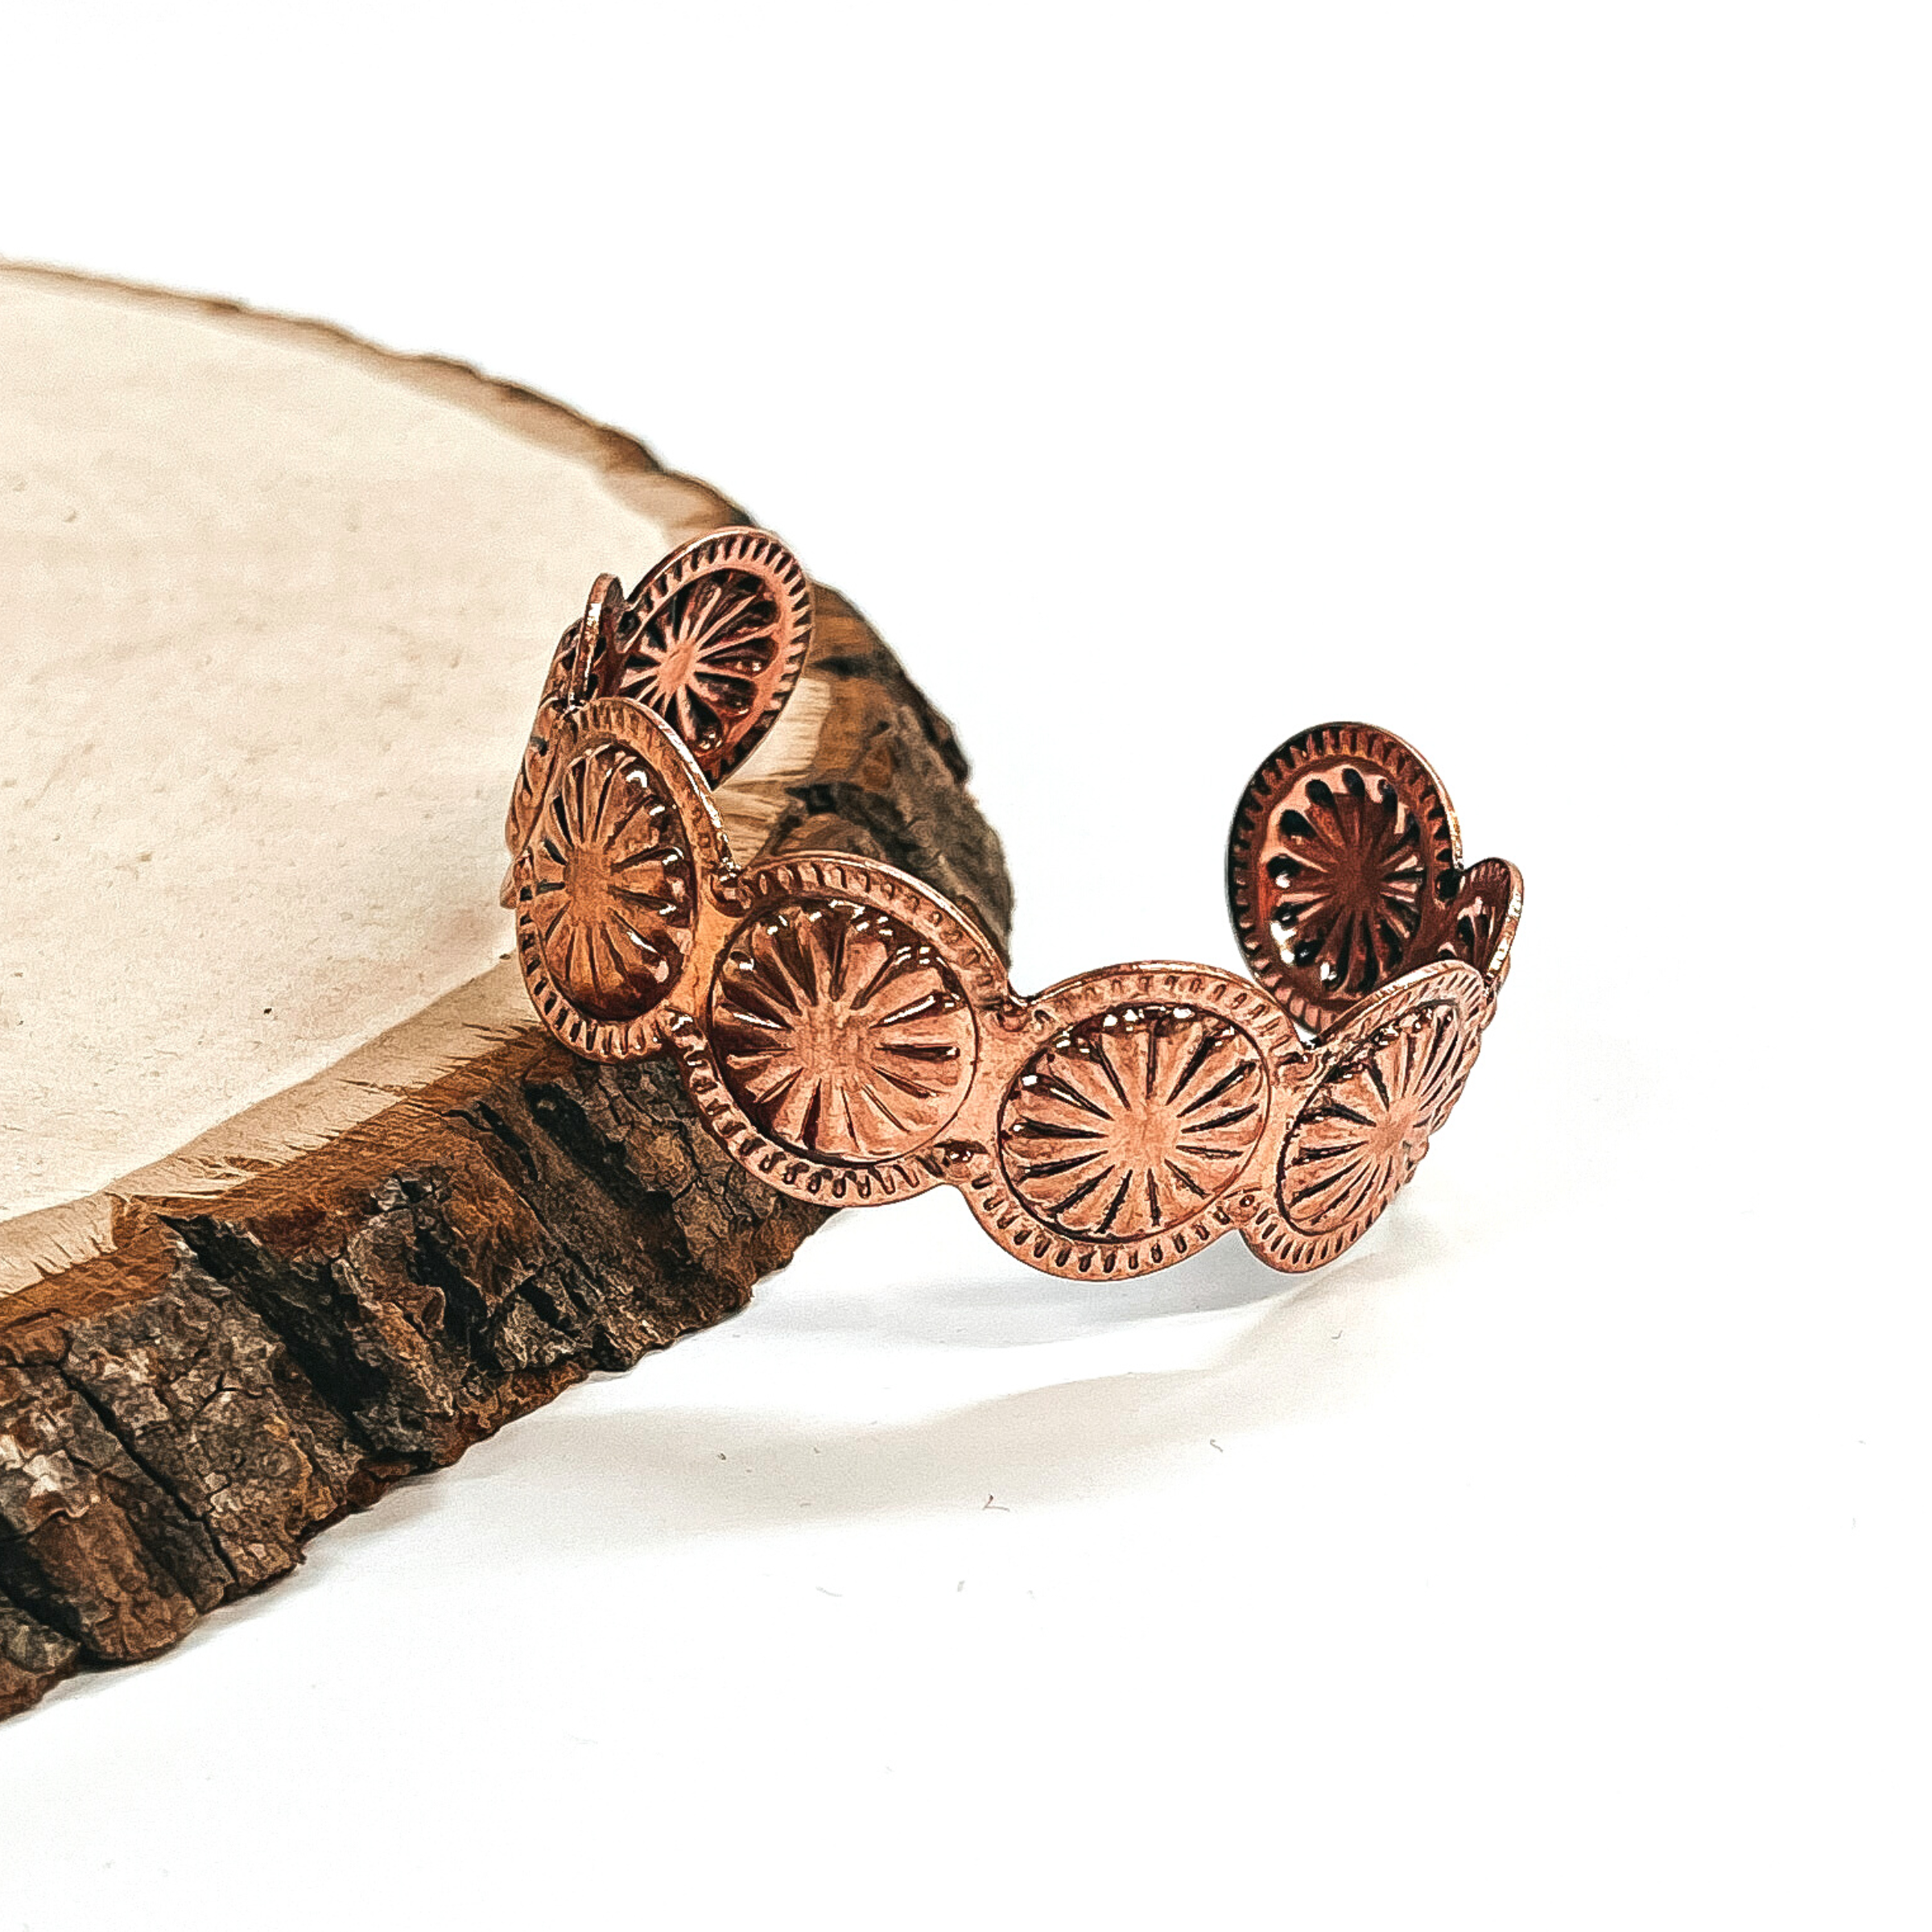 This is a copper concho stamped cuff bracelet leaning against a slab of wood and white  background.